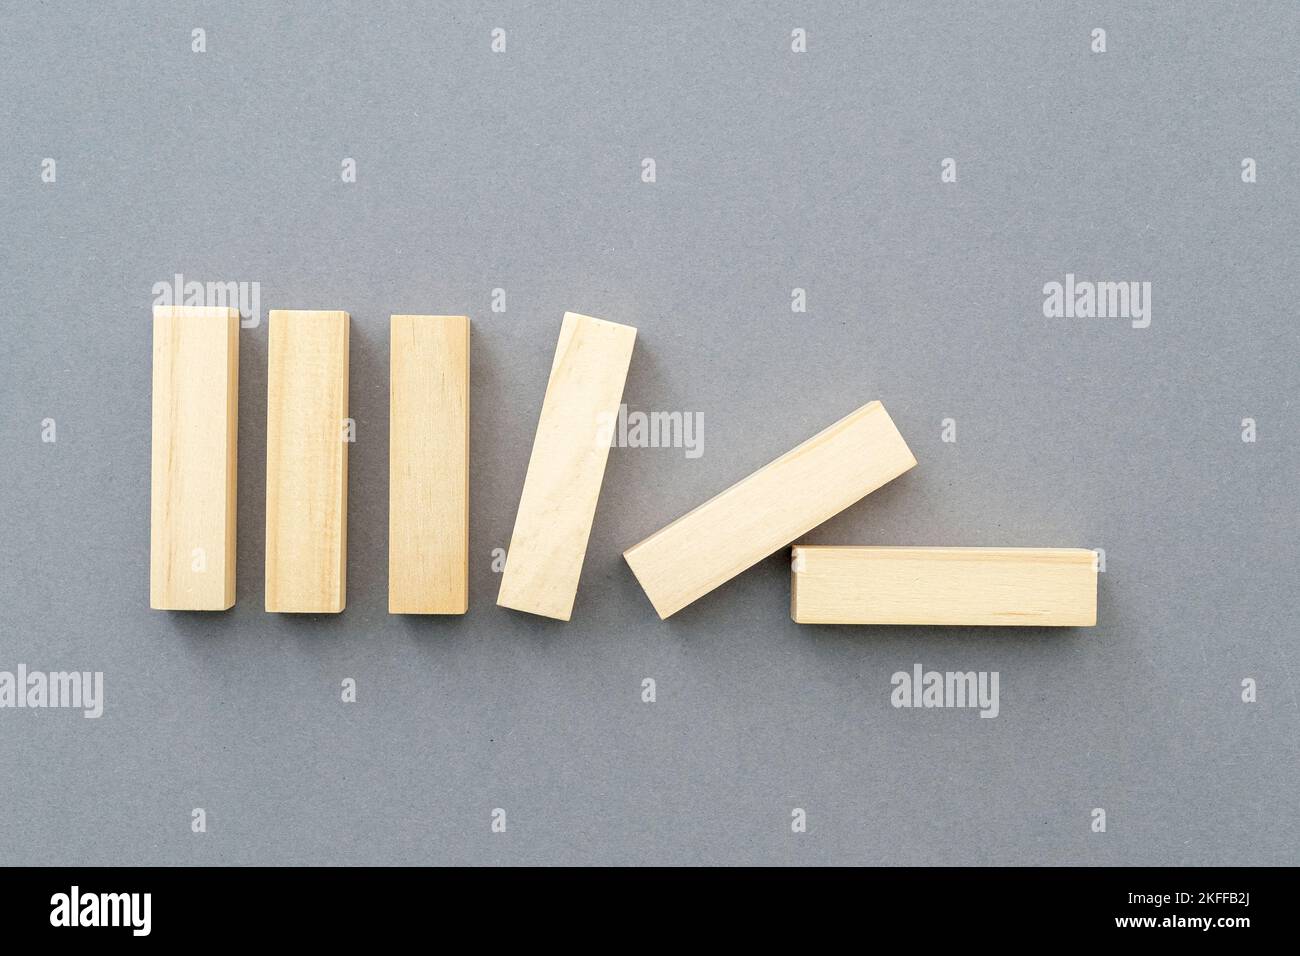 Row of falling vertical wooden shapes business concept picture about team building, leadership, supporting. Blank wooden figures on gray background. Stock Photo